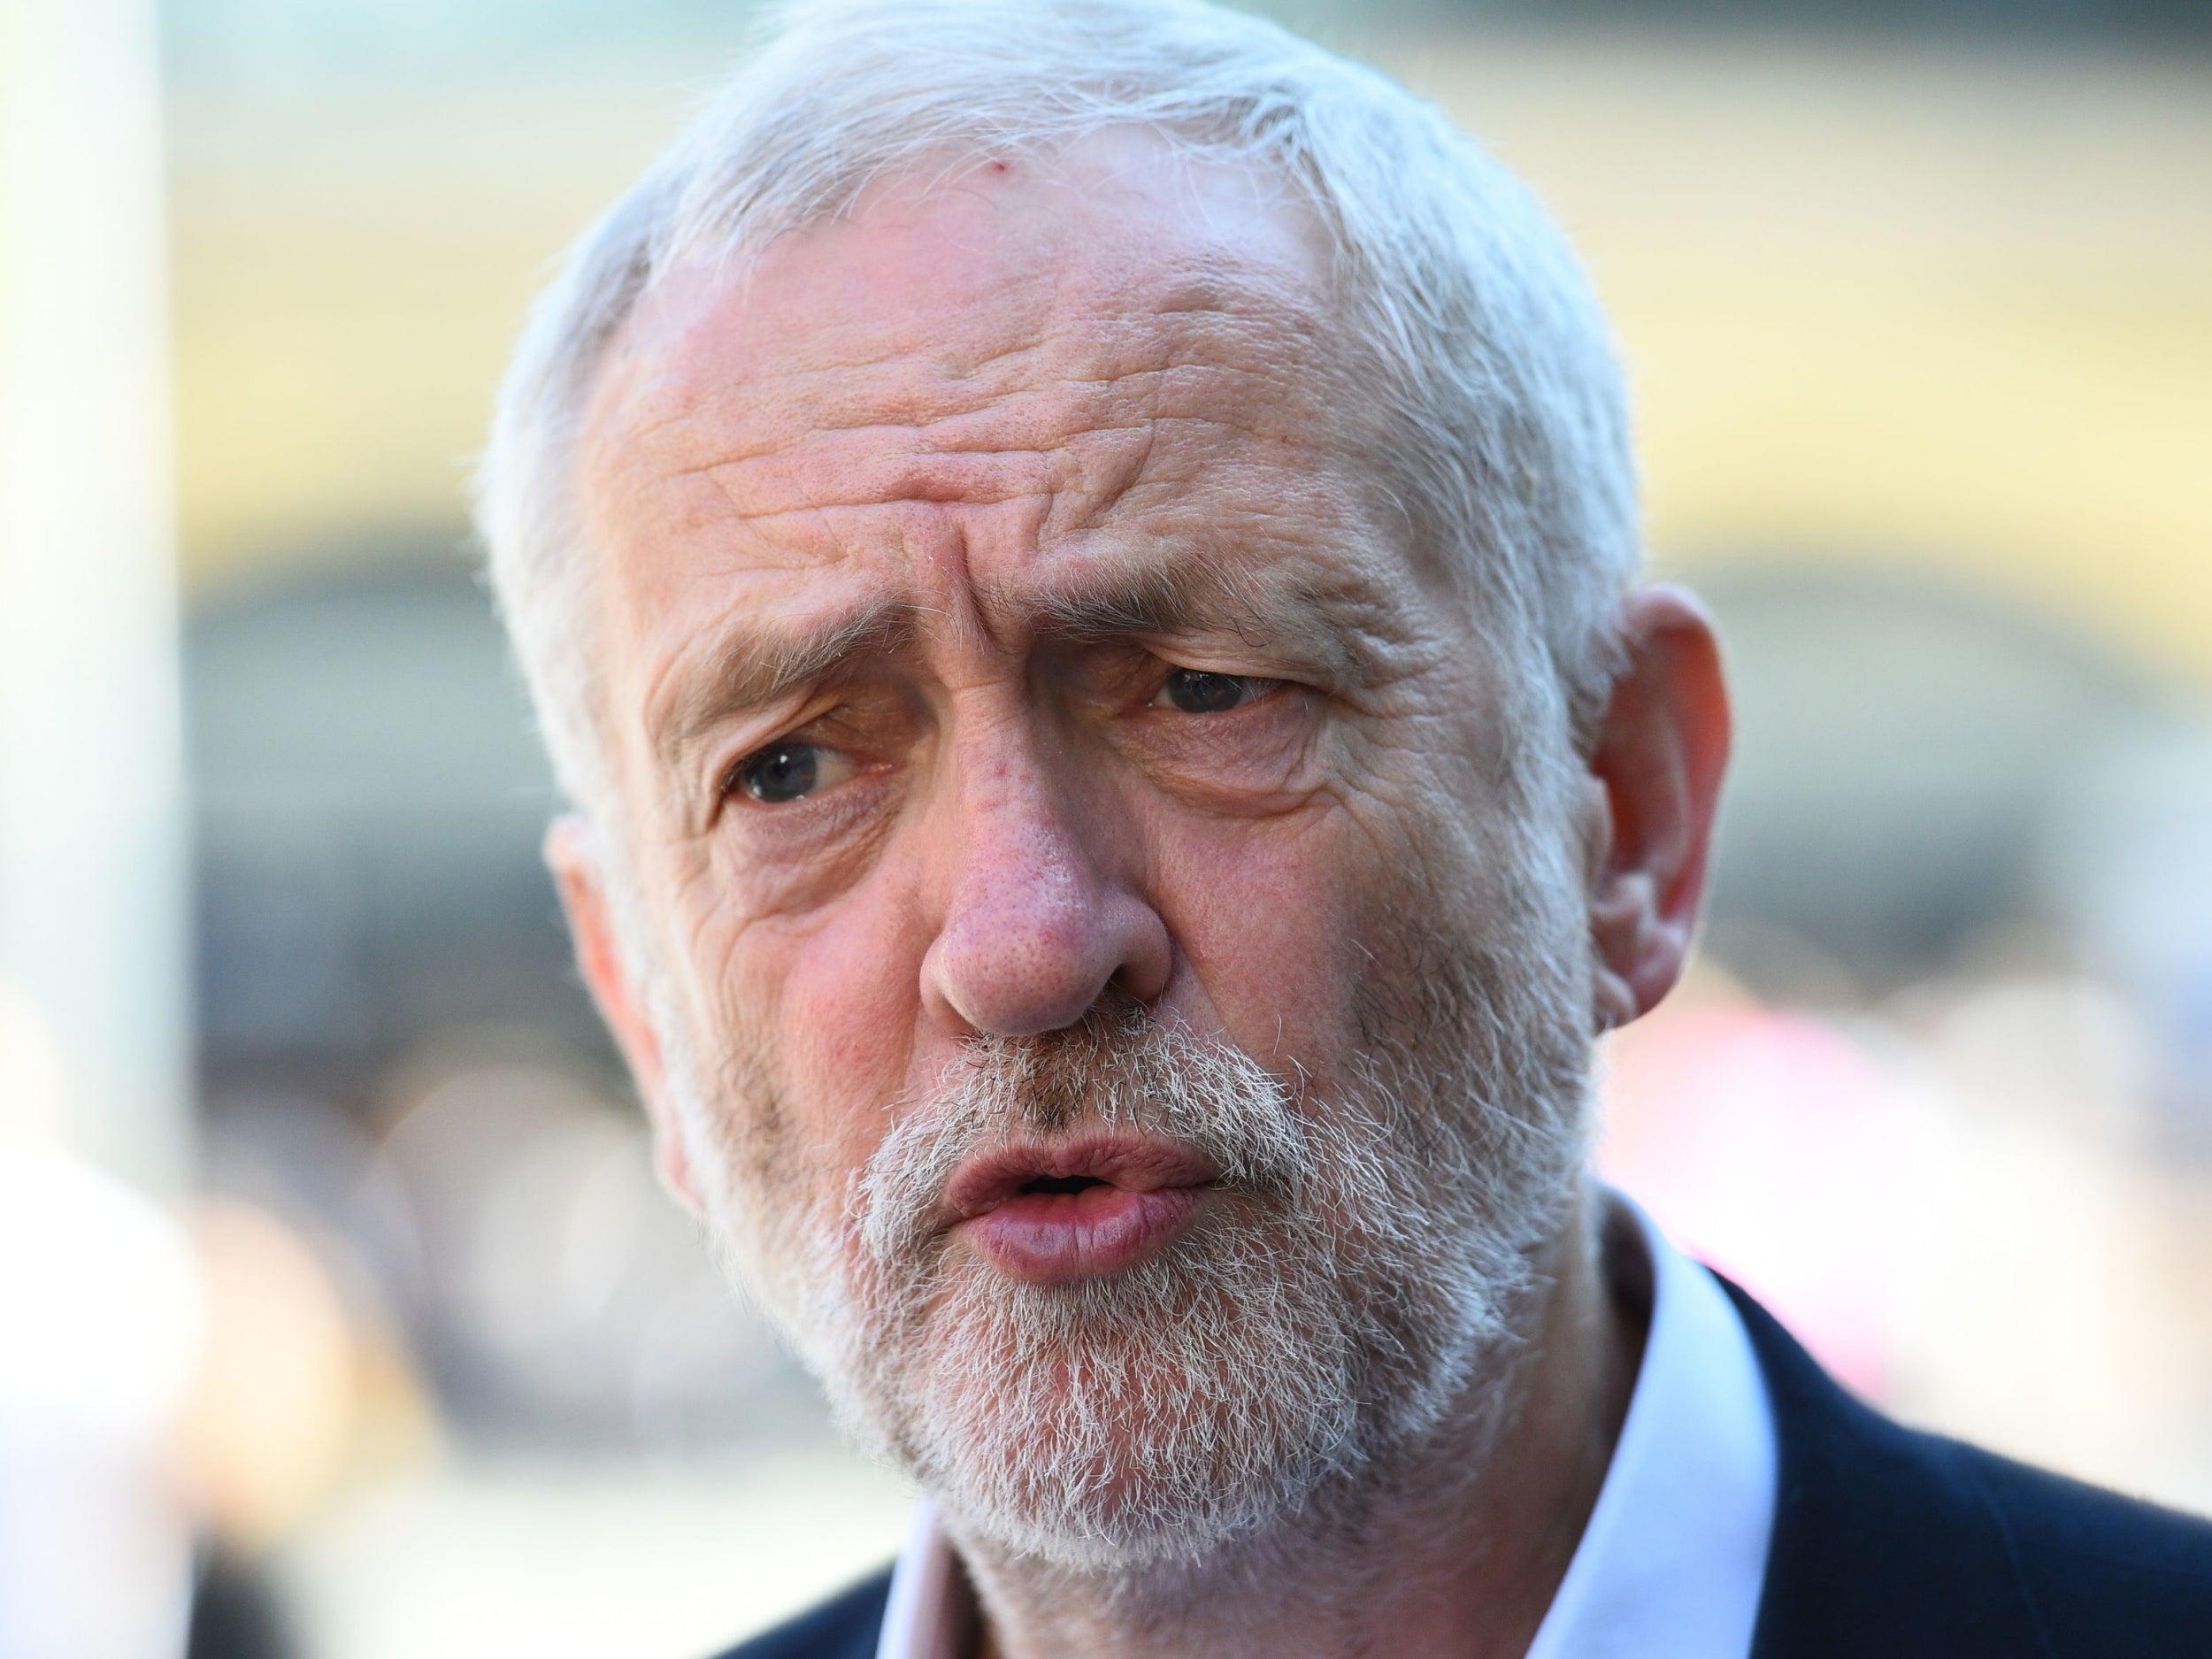 Labour leader Jeremy Corbyn has apologised amid a row over antisemitism